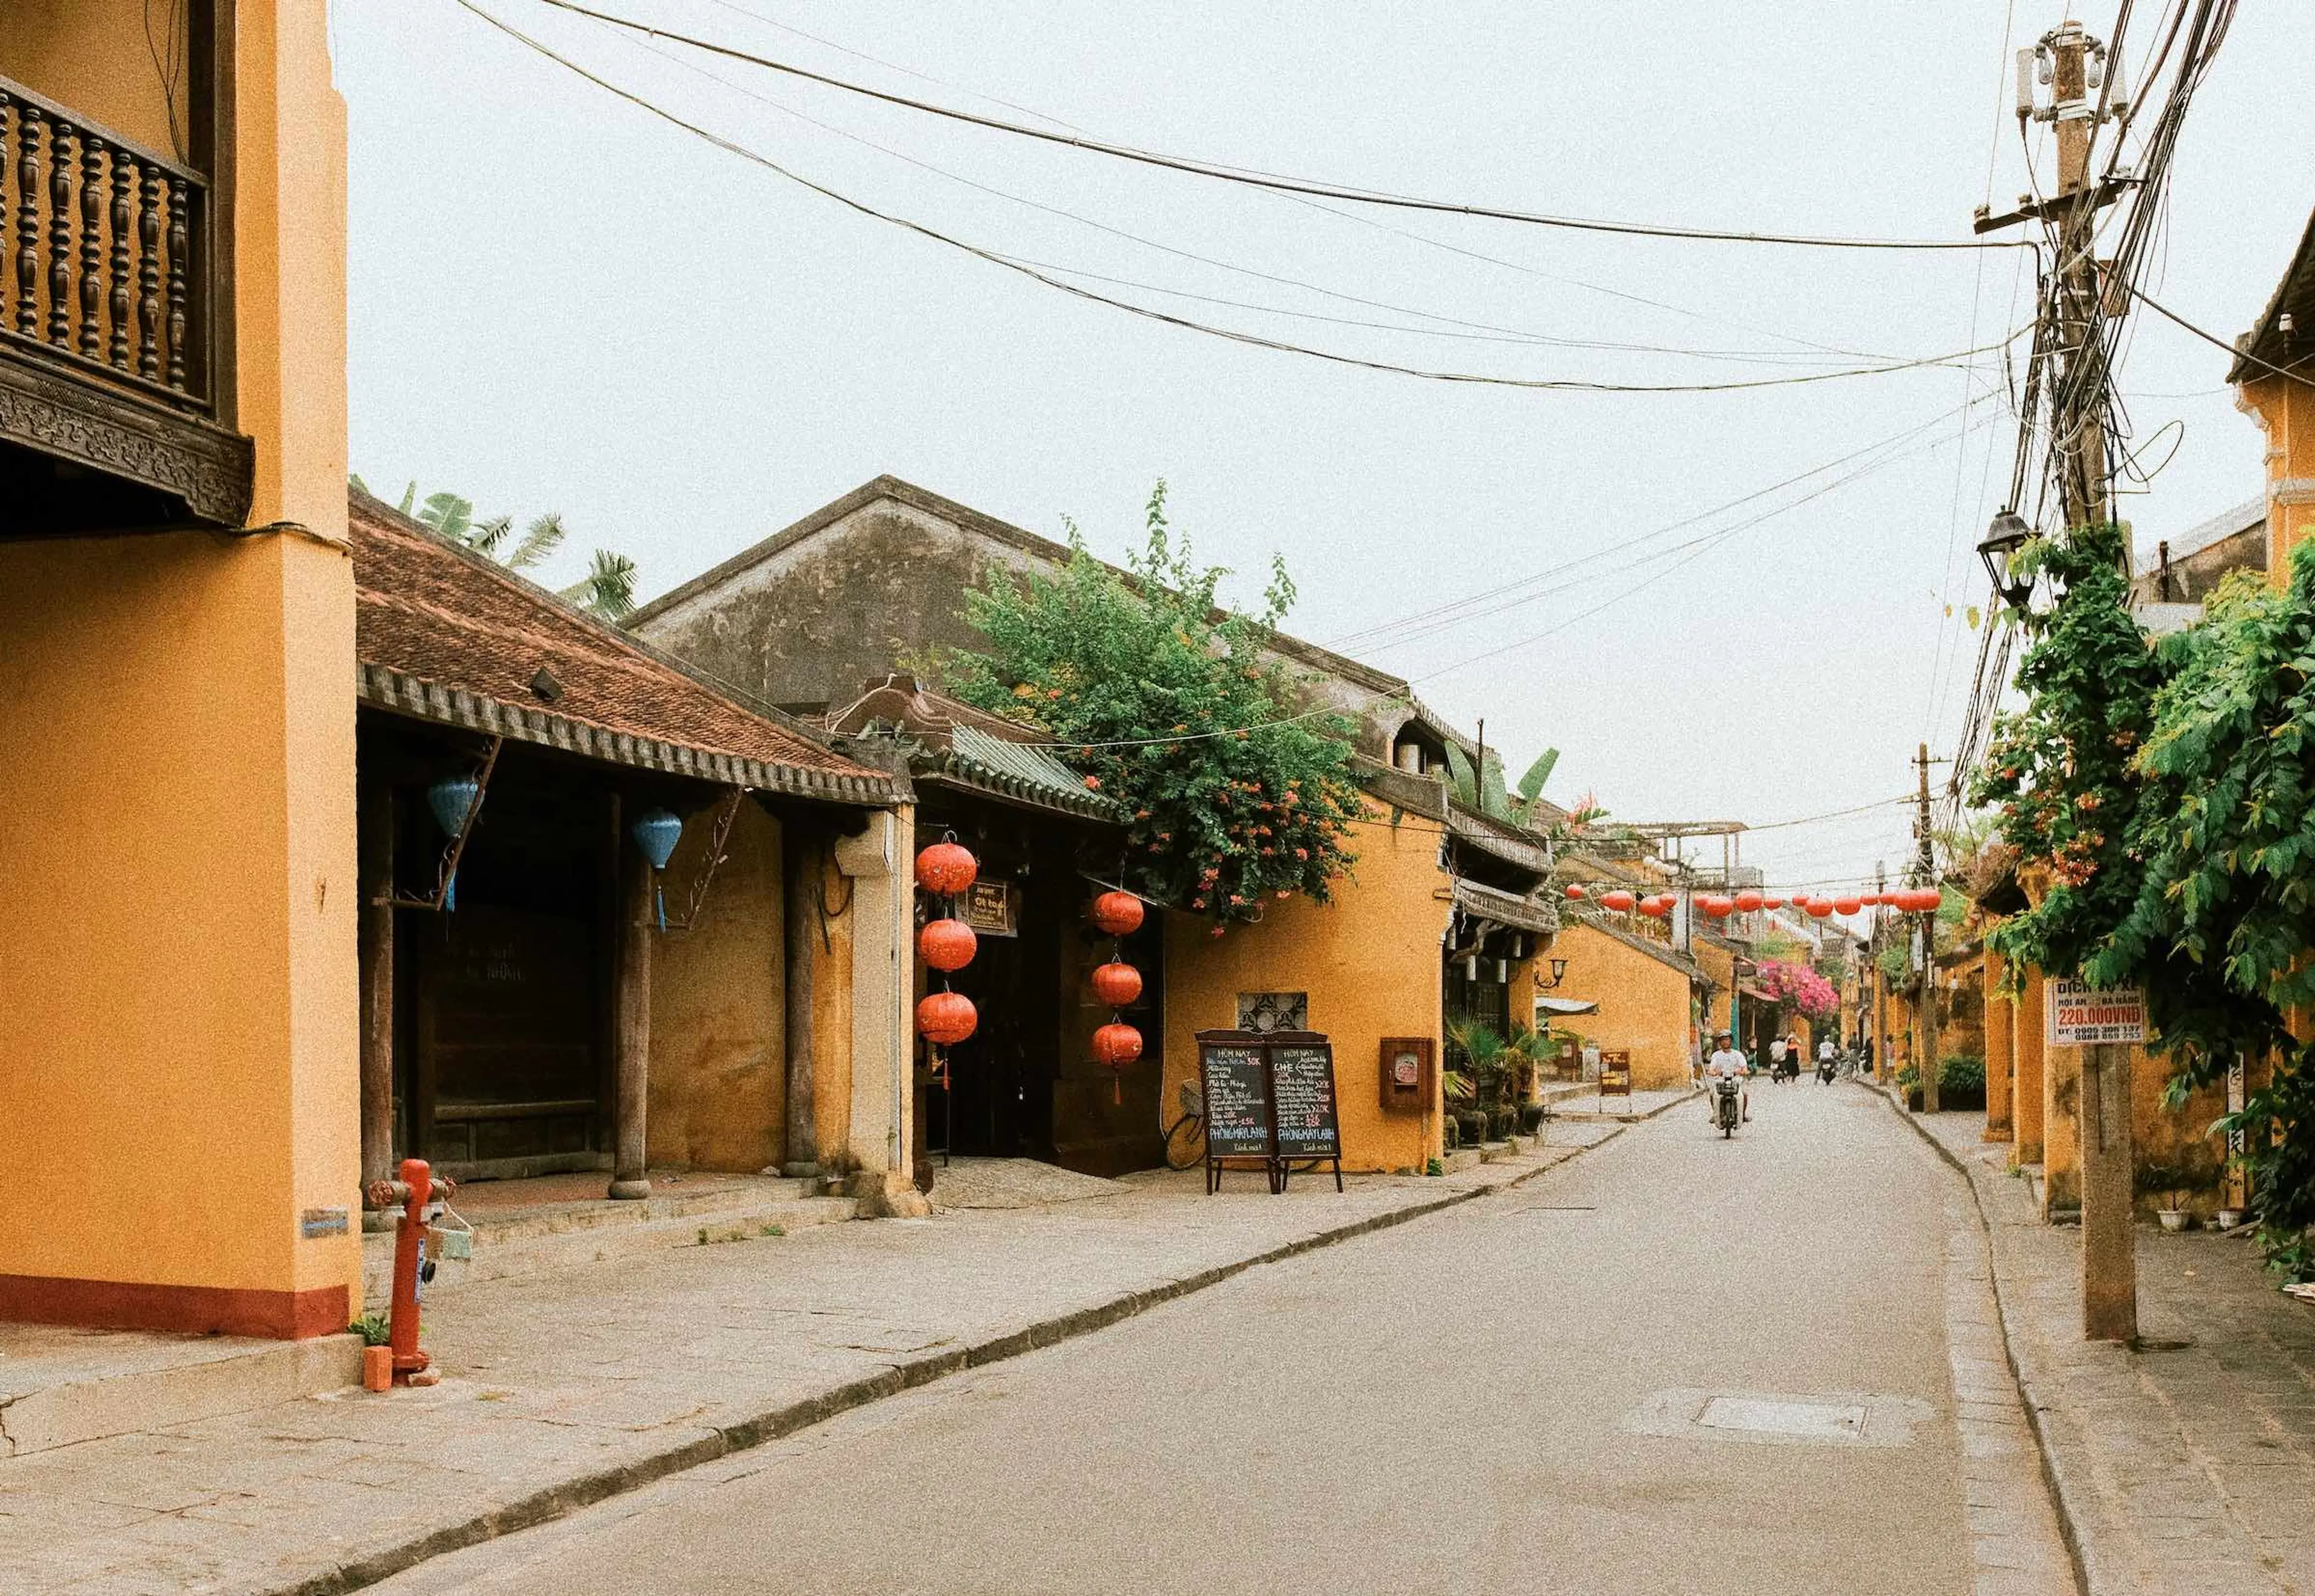 Astonishing Architecture from Hoi An Ancient Town